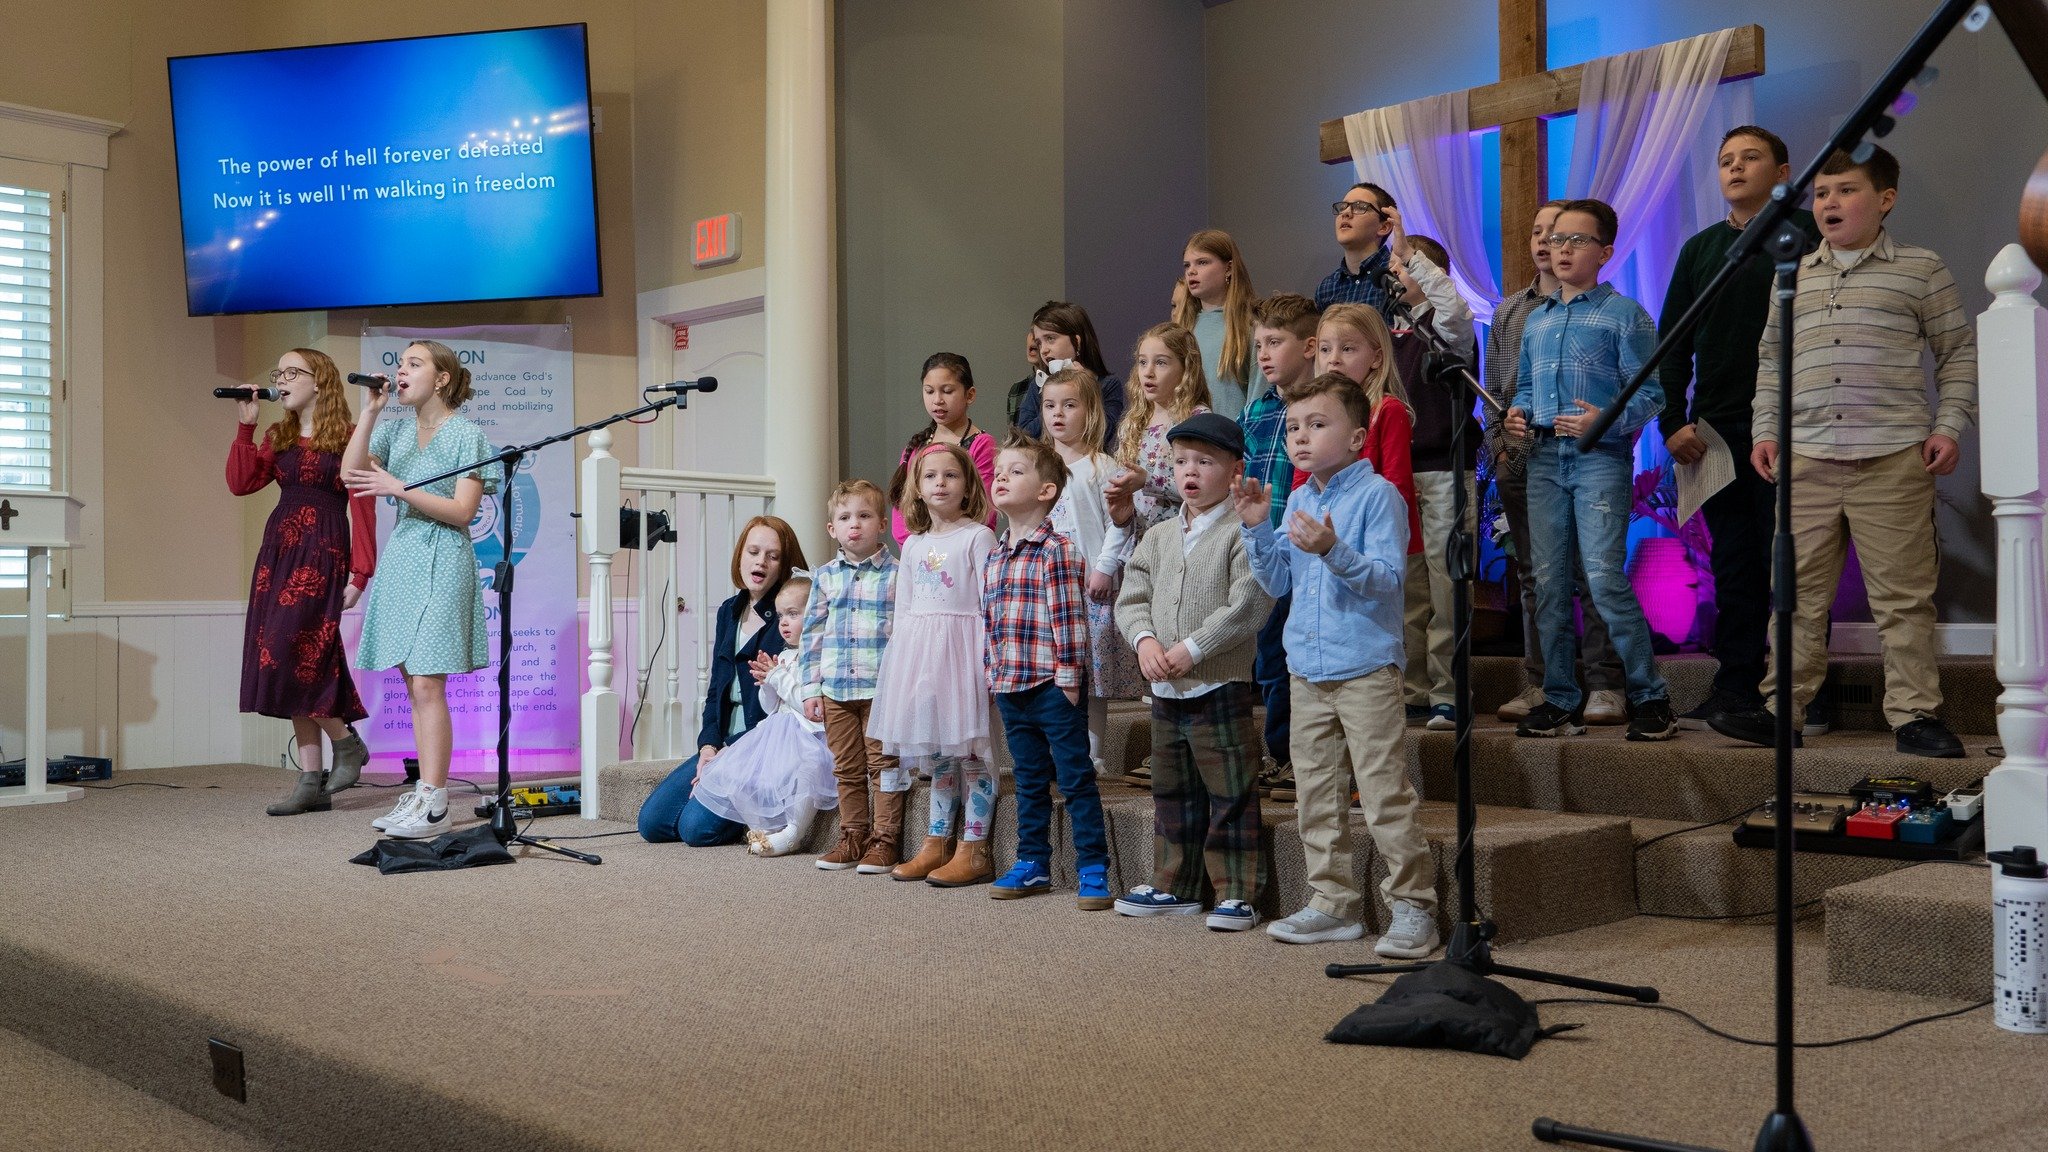 OBC Family Fun!
What a fantastic Sunday at OBC!  Our hearts were overflowing with joy as our OBC Kids led worship alongside Josiah &amp; Lexi and Kathy &amp; Ezri! Seeing their enthusiasm light up the stage was a true blessing. Thank you to our OBC K